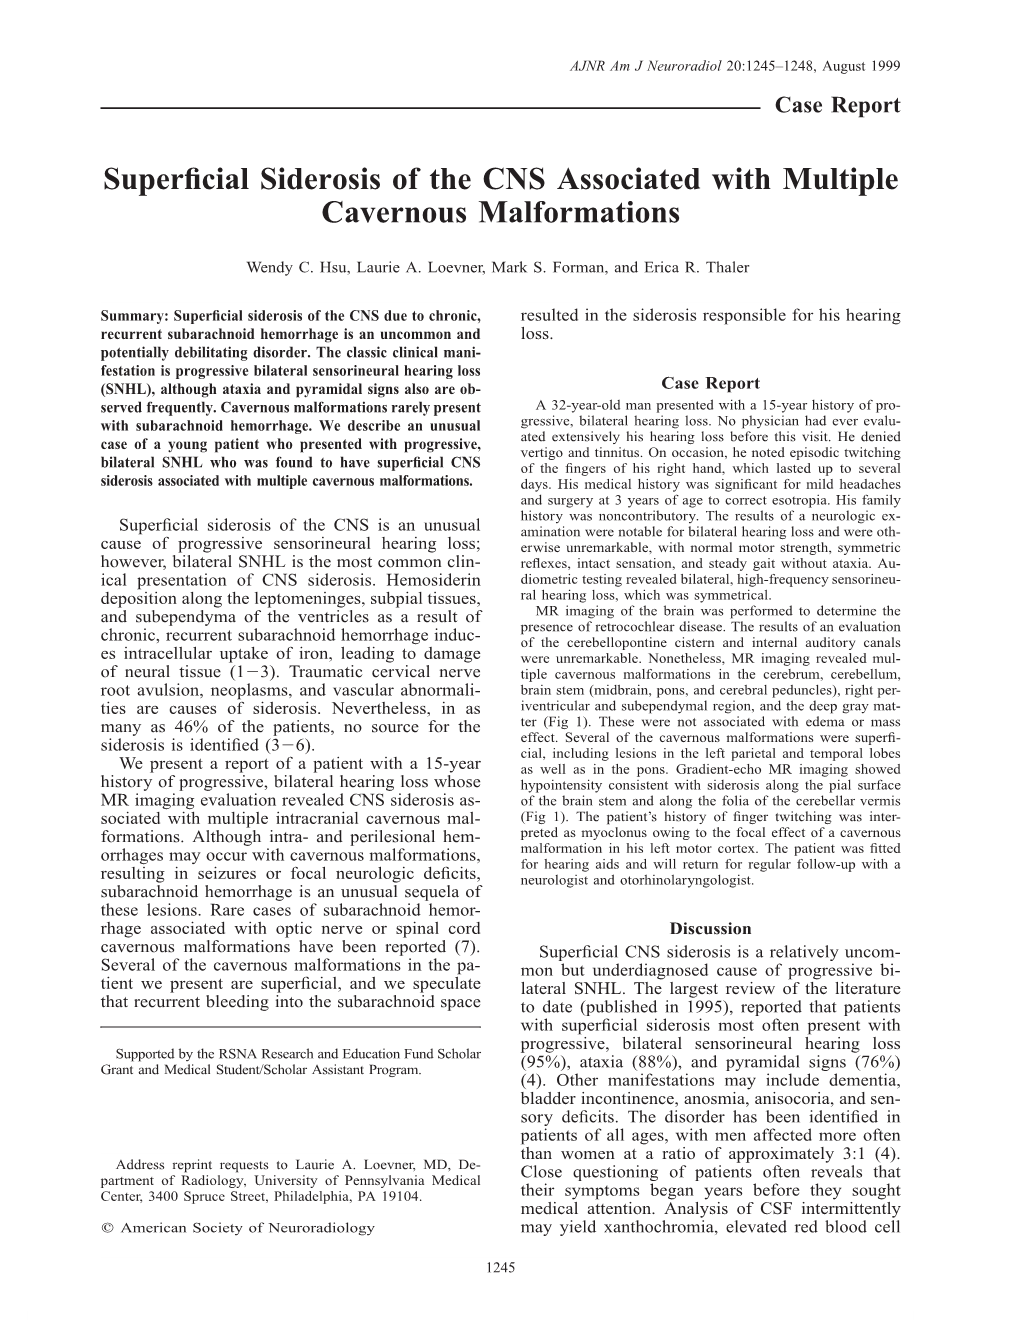 Superficial Siderosis of the CNS Associated with Multiple Cavernous Malformations